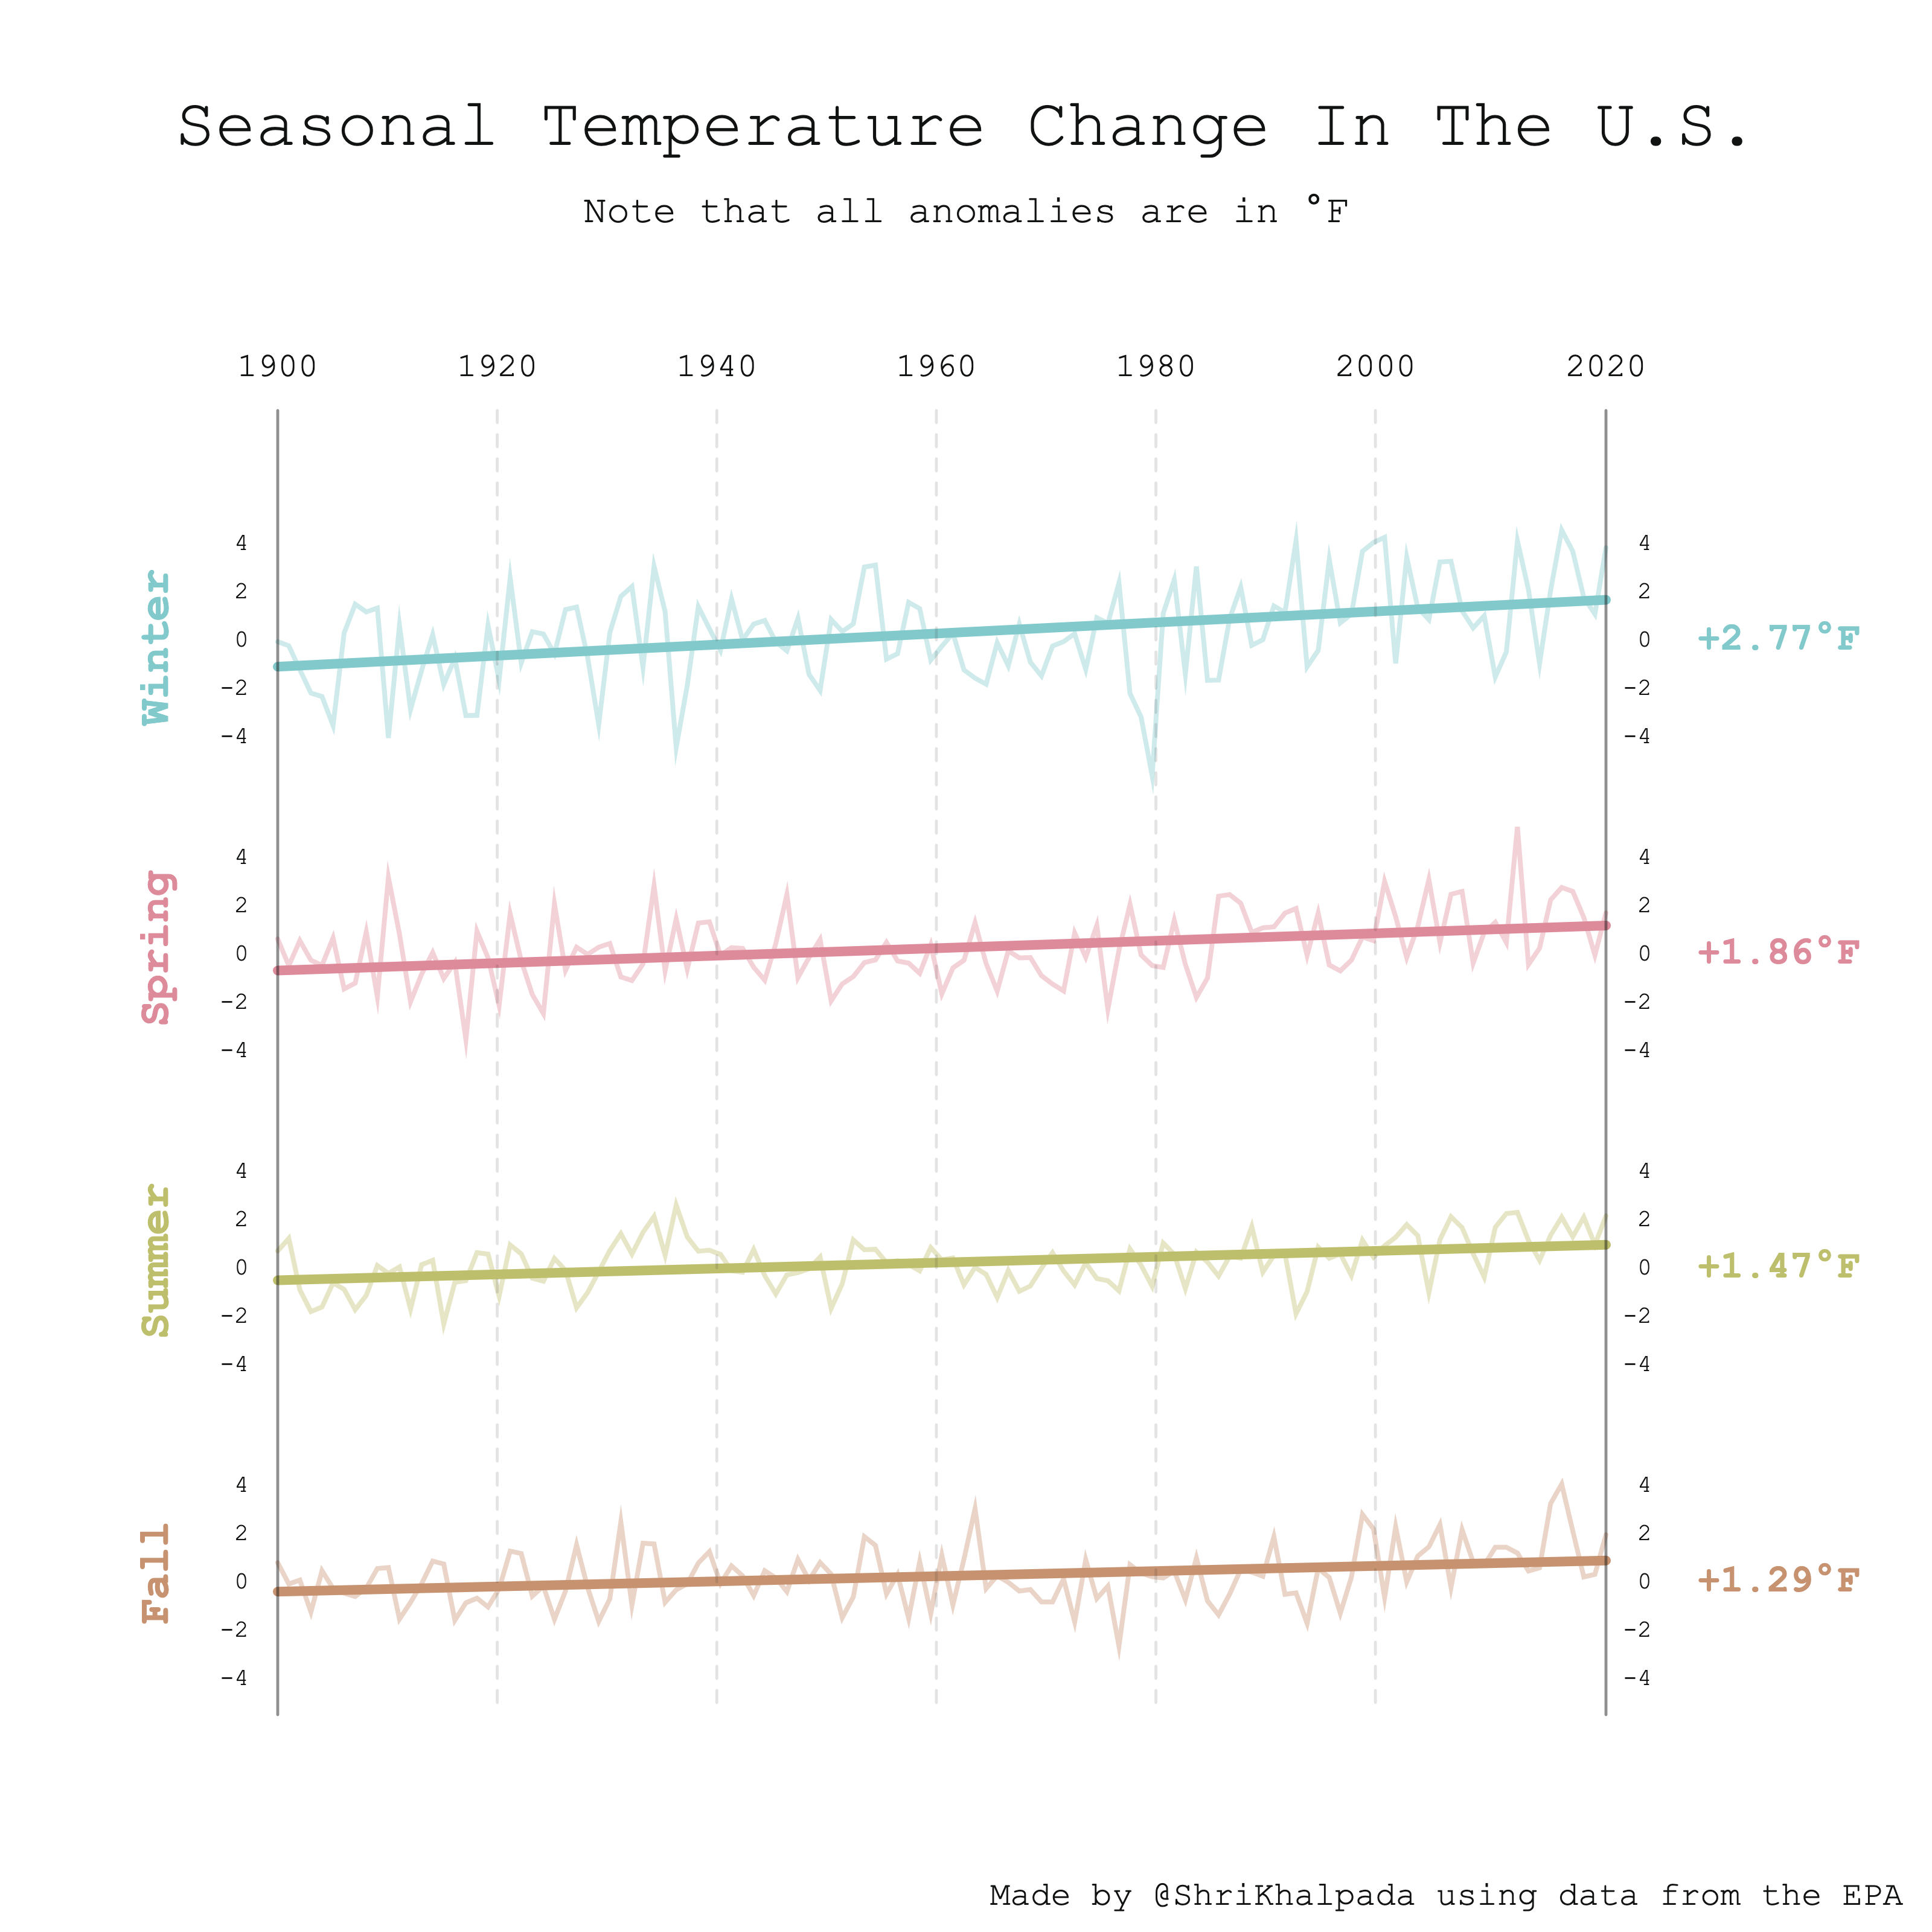 A slope chart showing temperature changes in the contiguous United States across all 4 seasons between 1900 and 2020.